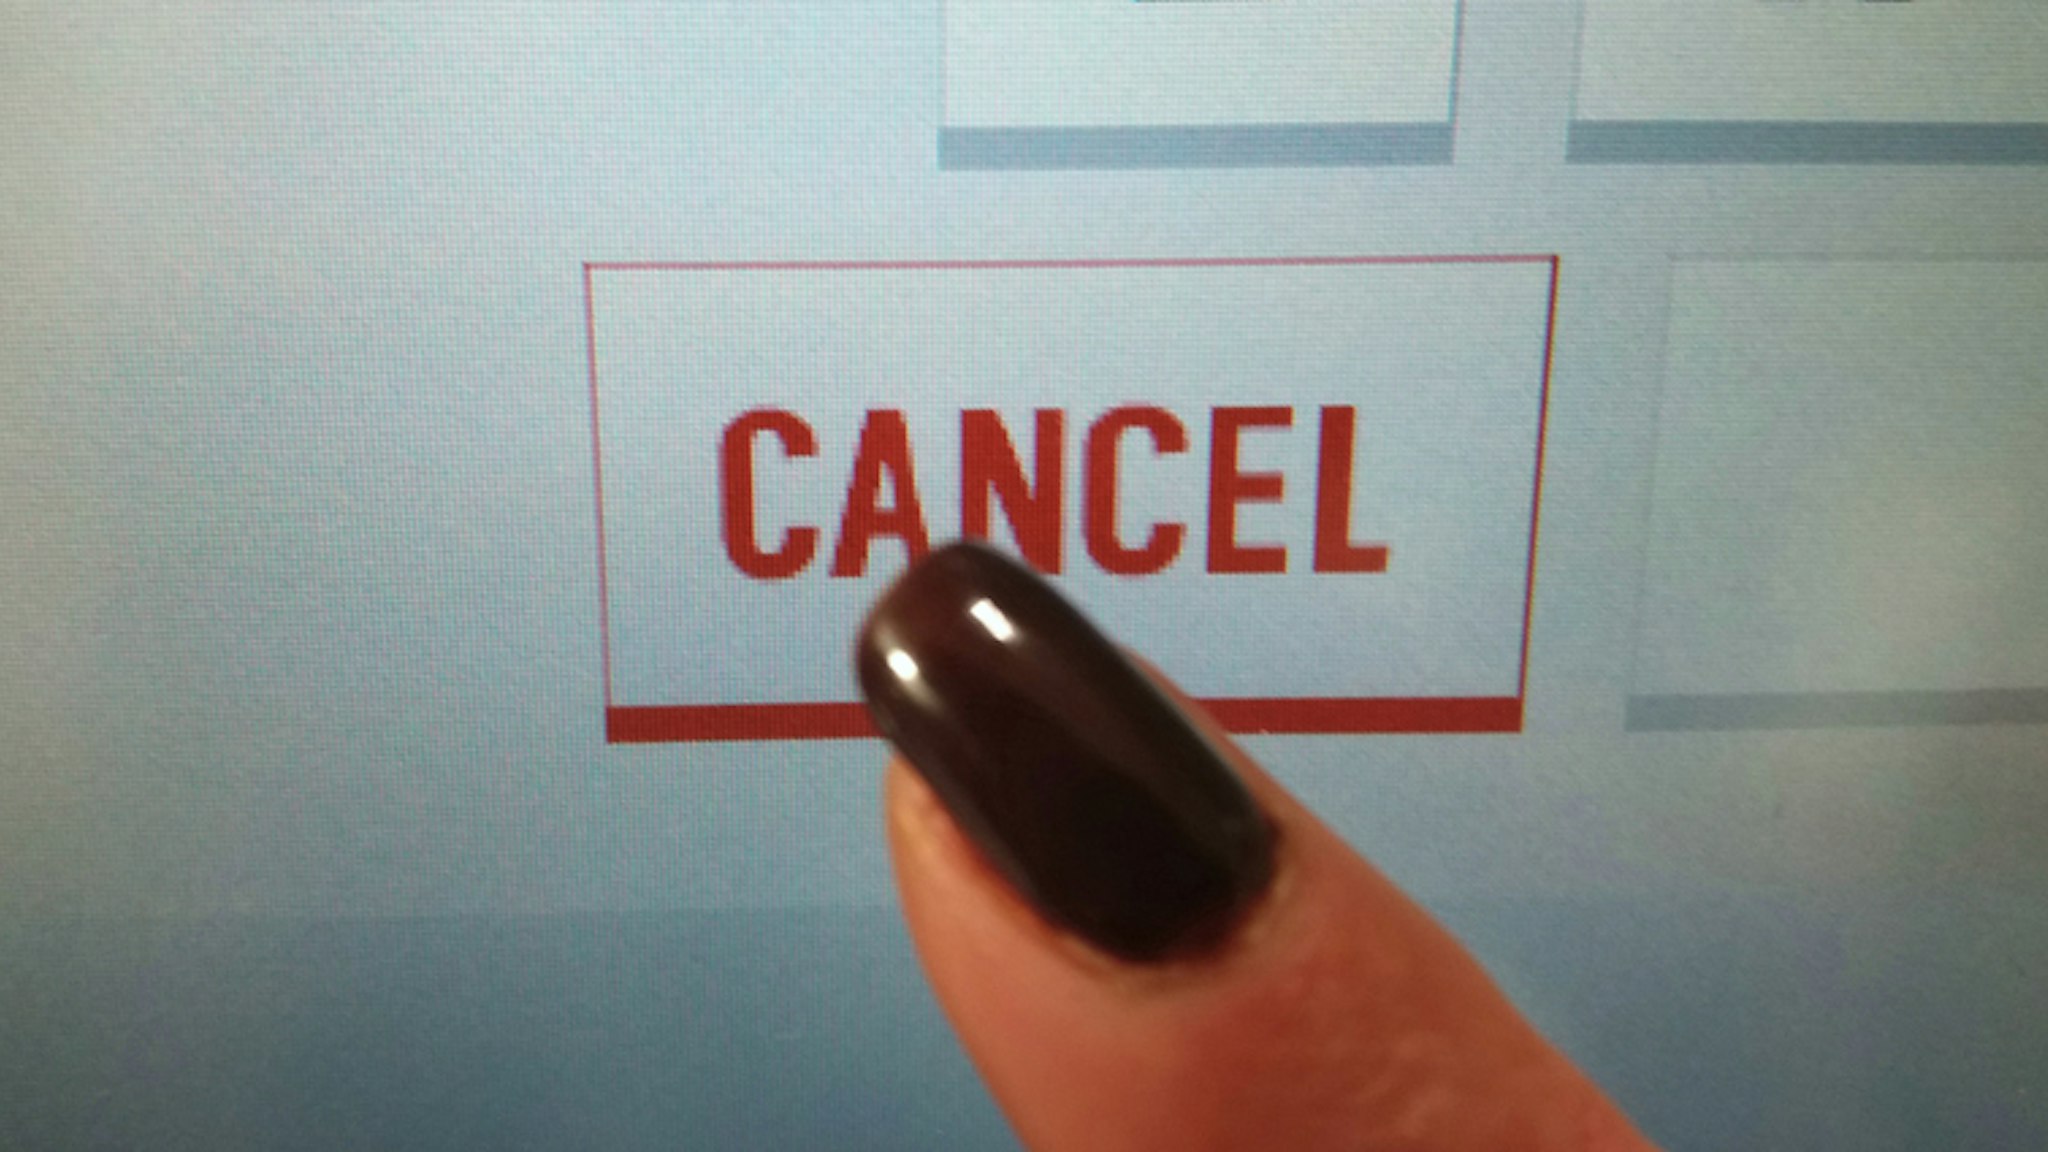 Finger clicks the word CANCEL on the touch screen